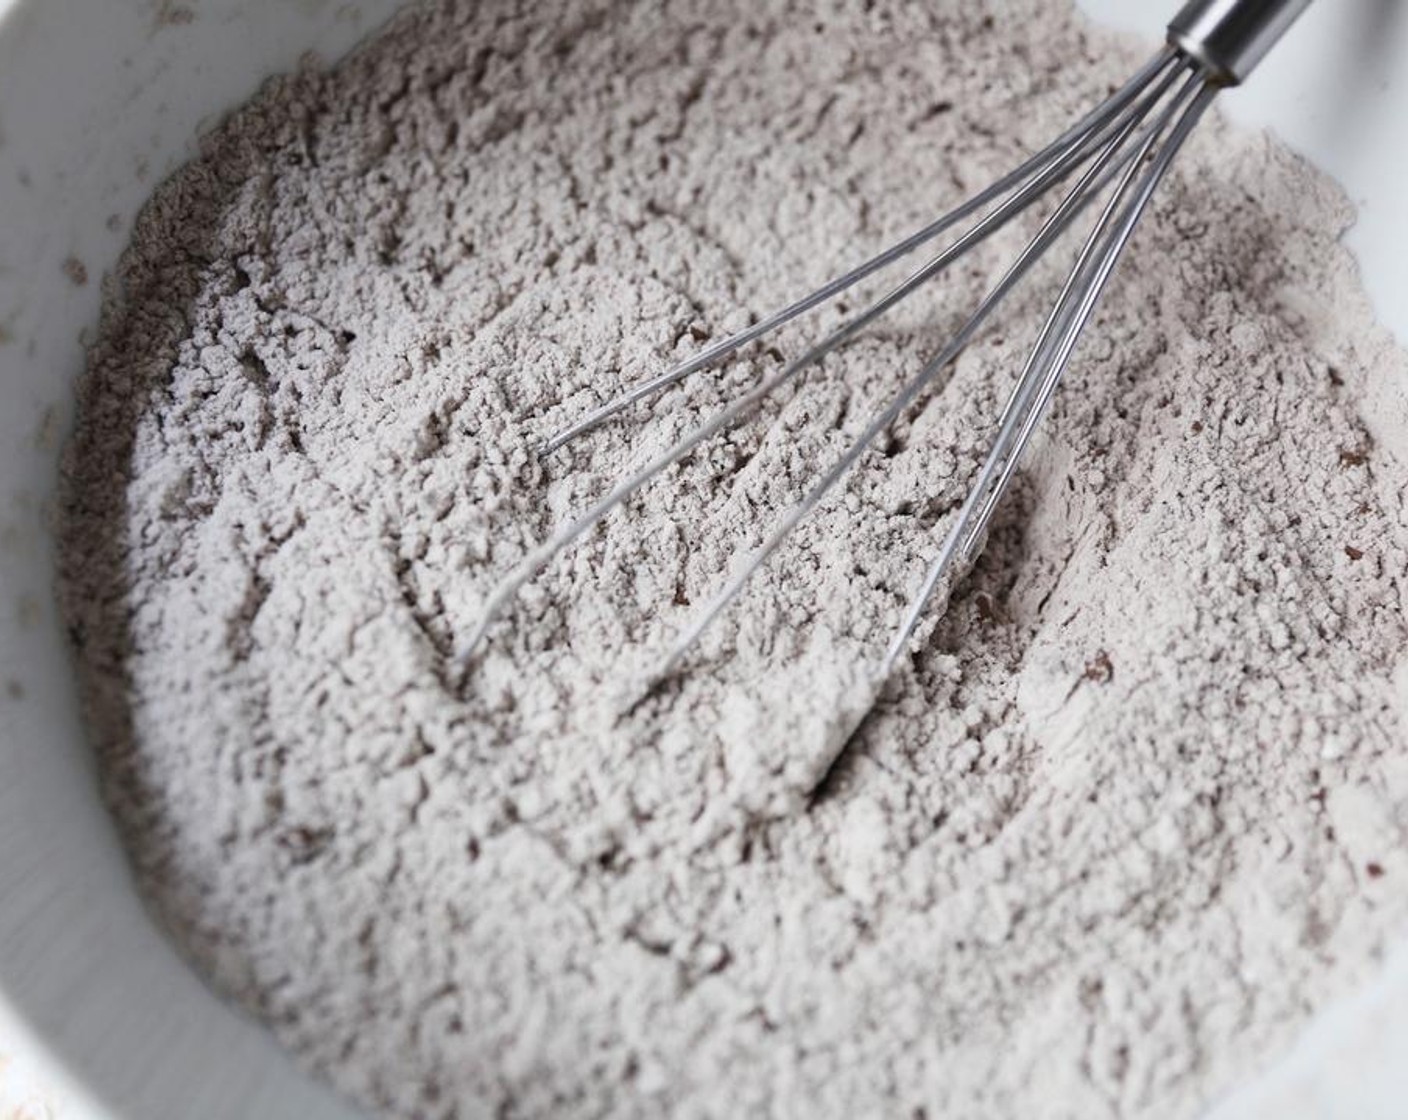 step 3 Combine the All-Purpose Flour (2 cups), Dark Cocoa Powder (2 1/2 Tbsp), Baking Powder (1 Tbsp) and Salt (1 pinch) in a bowl and whisk together to get rid of any lumps.